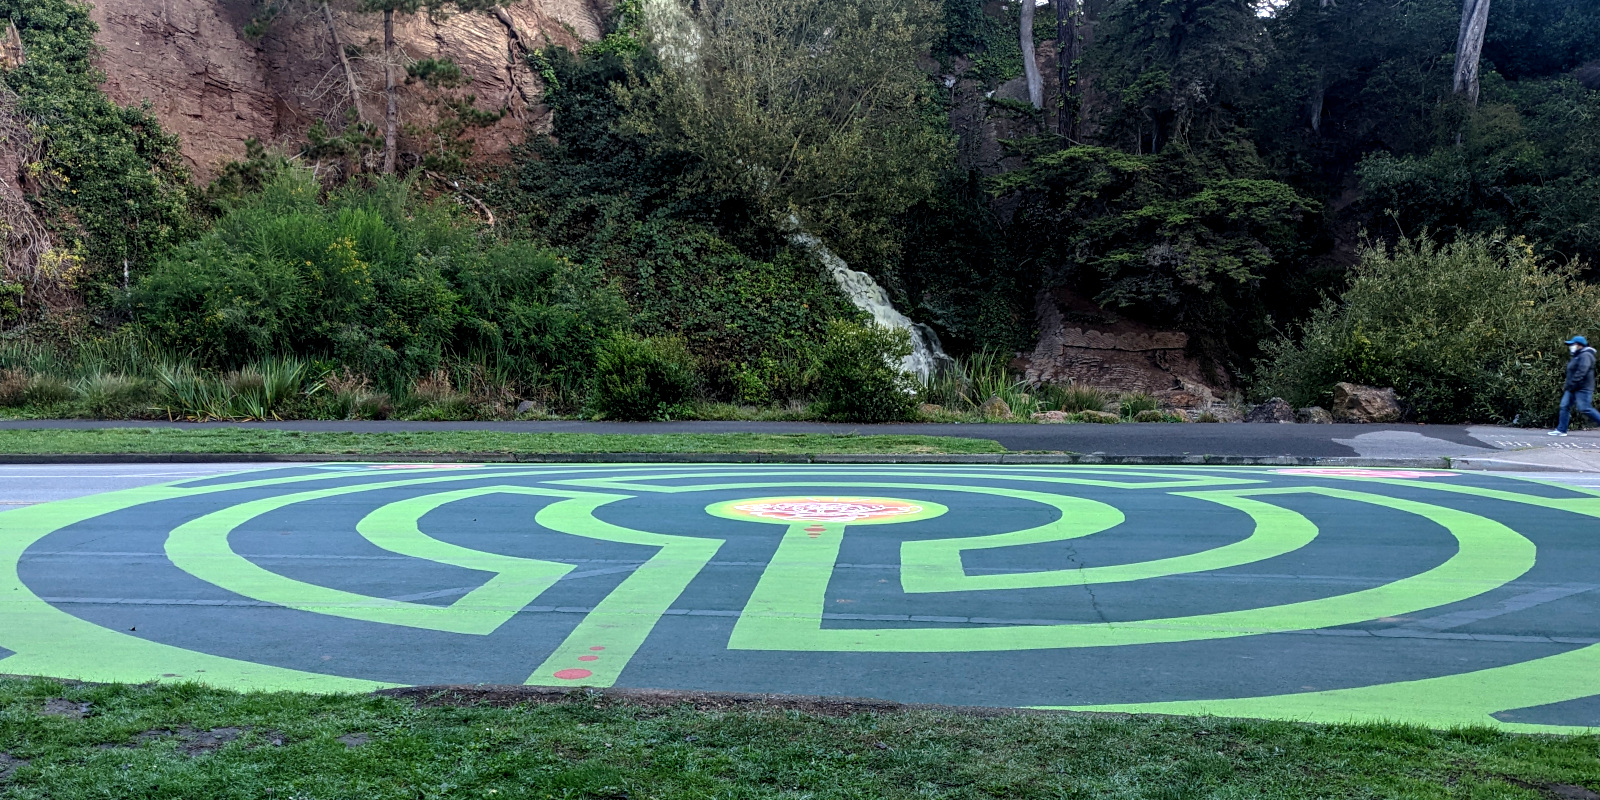 [photo: green labyrinth with flowers painted on the ground]